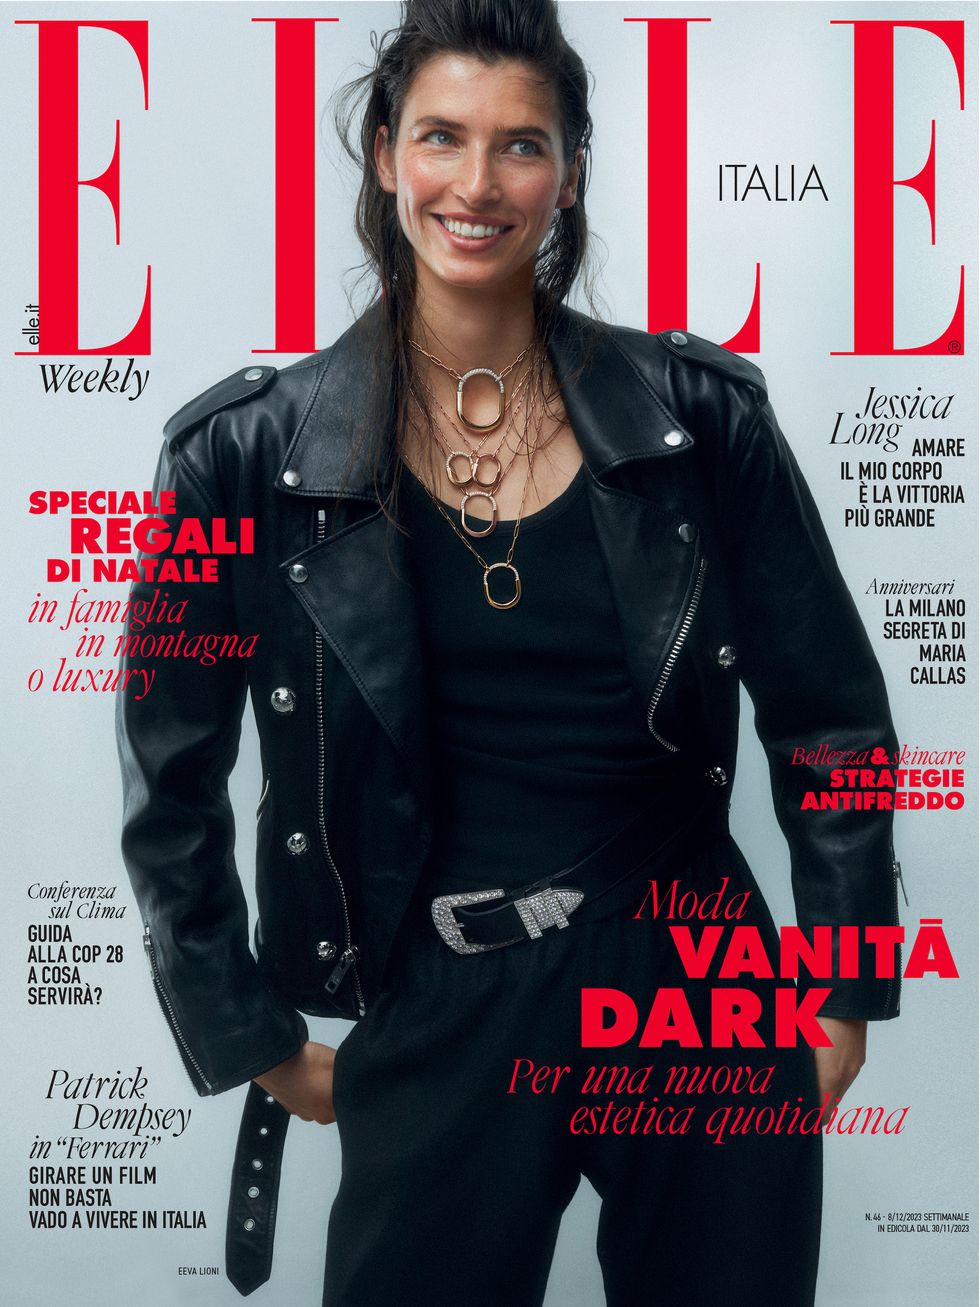 a woman smiling on a magazine cover